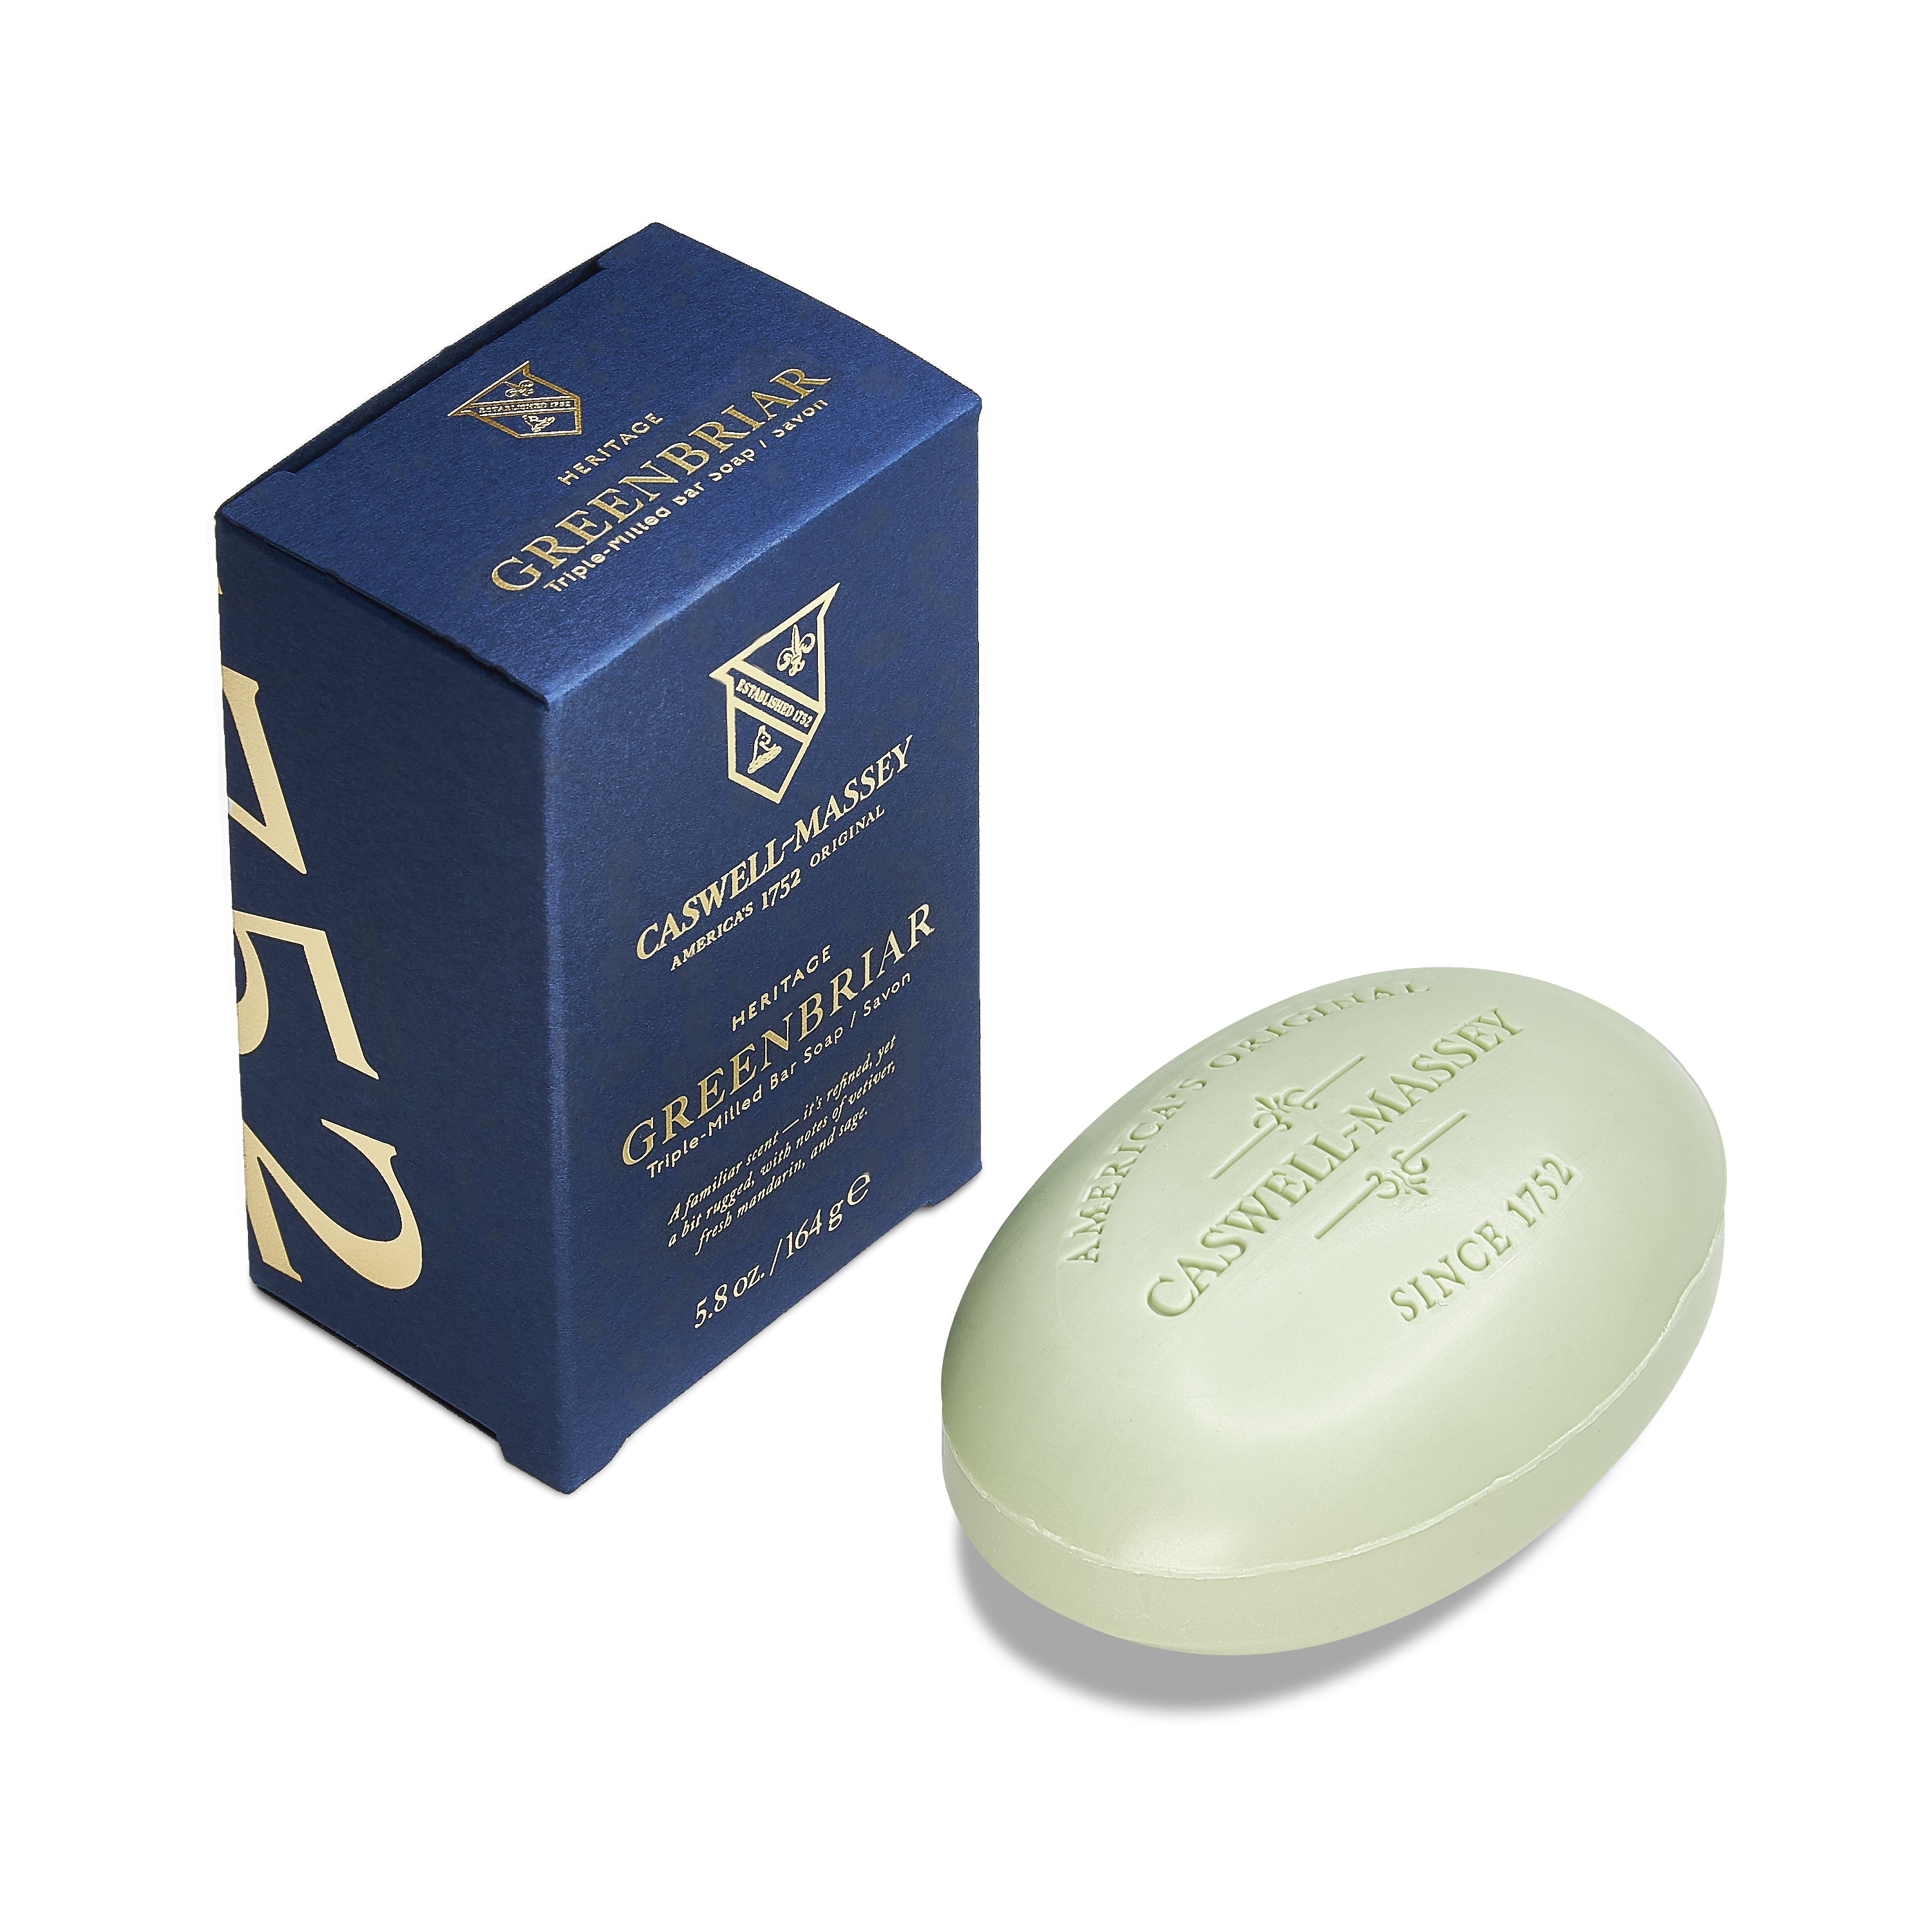 Caswell-Massey® Heritage Greenbriar Bar Soap shown with navy blue box